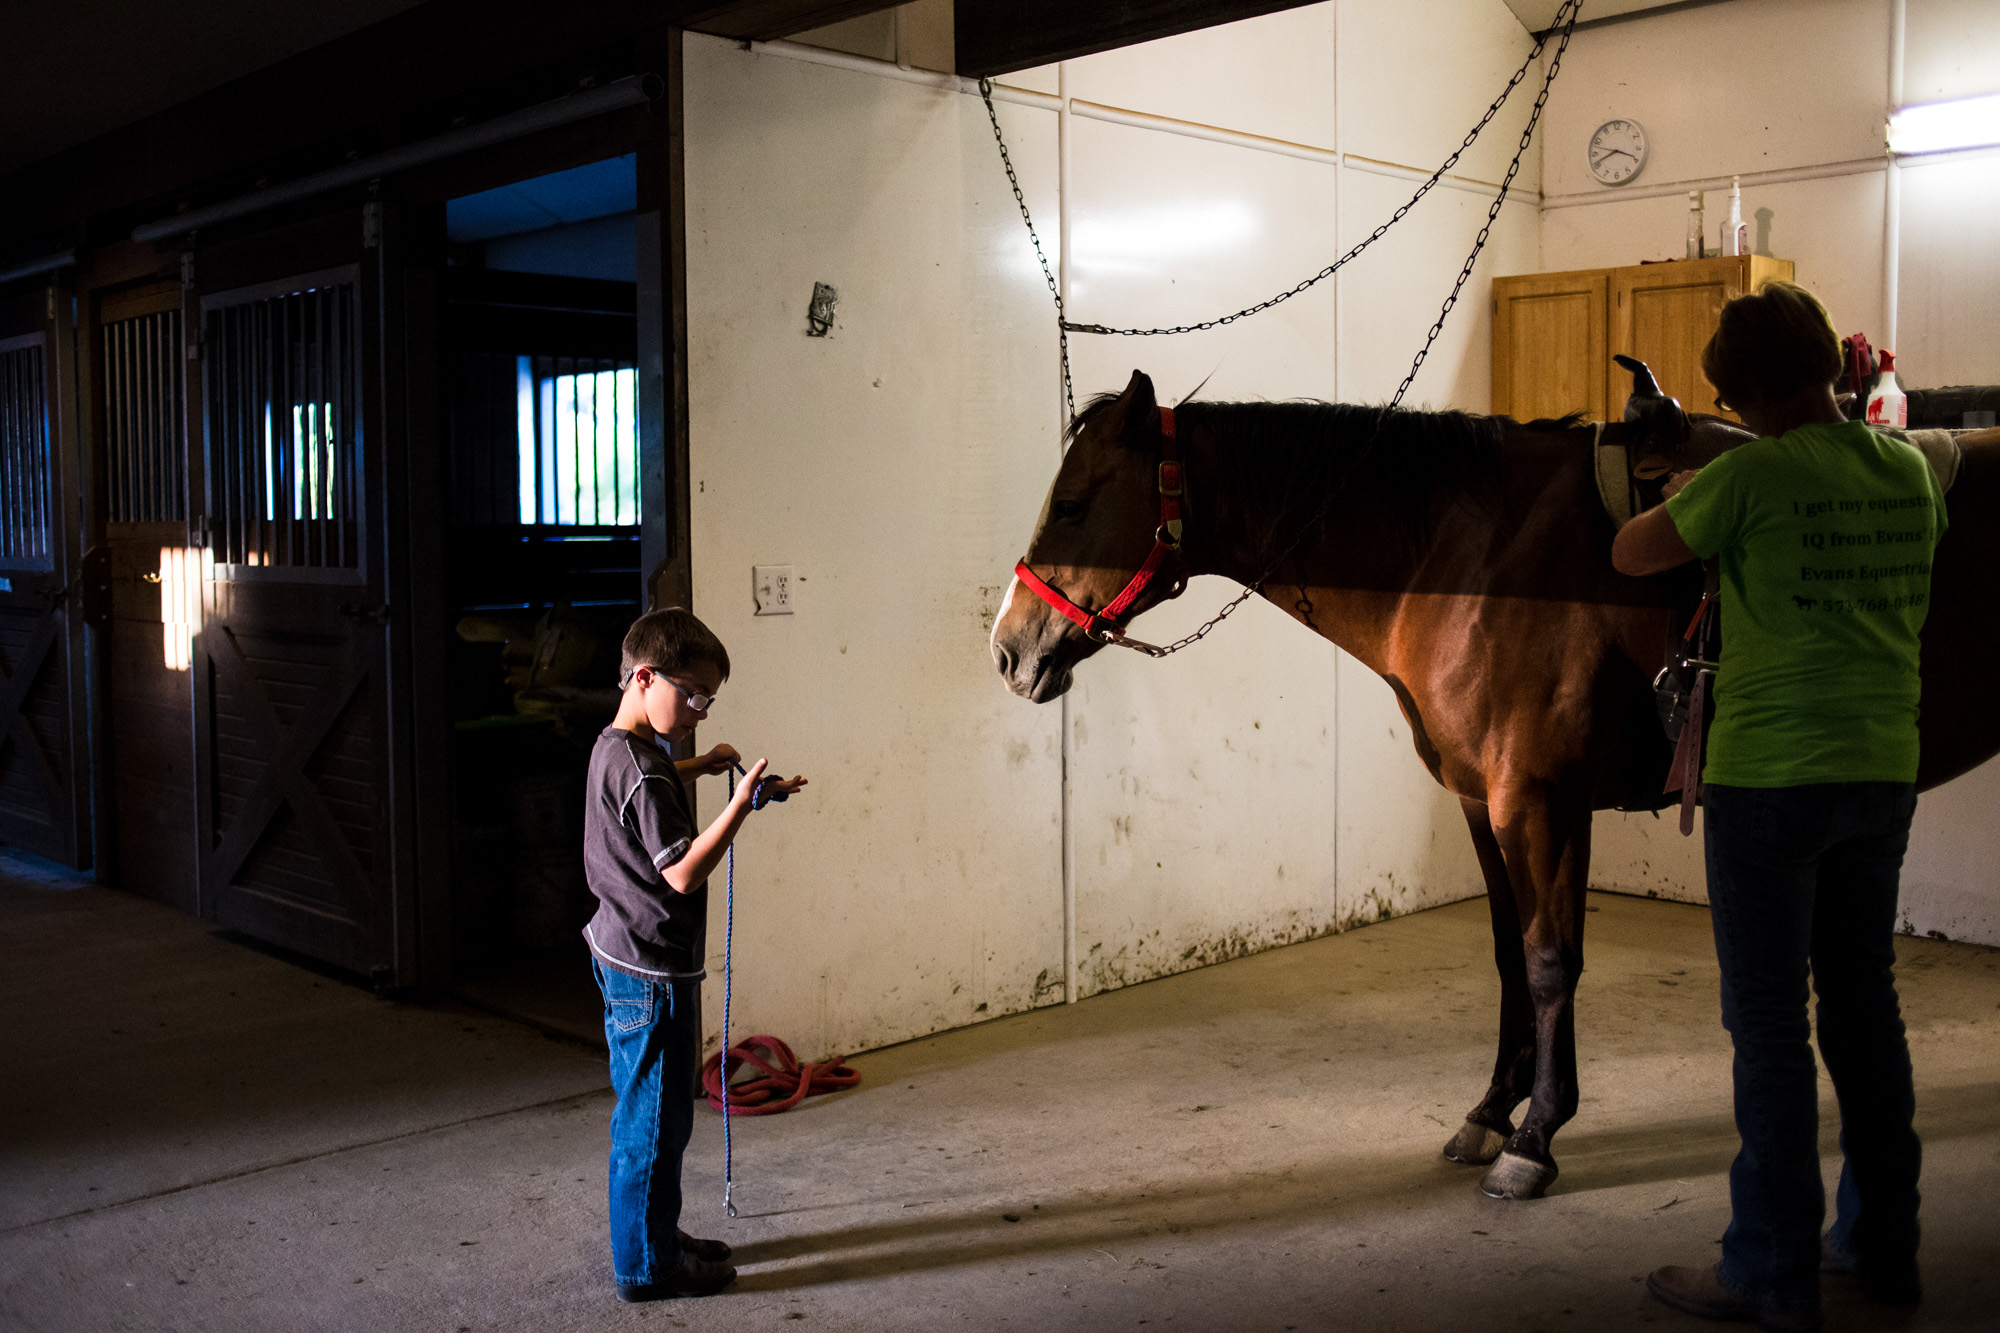  Treven’s instructor, Krystal, shows him how to take care of the horse after his therapy session. The therapy is meant to help Treven develop his motor skills, build muscle strength, and deal with sensory issues that come with being around animals an